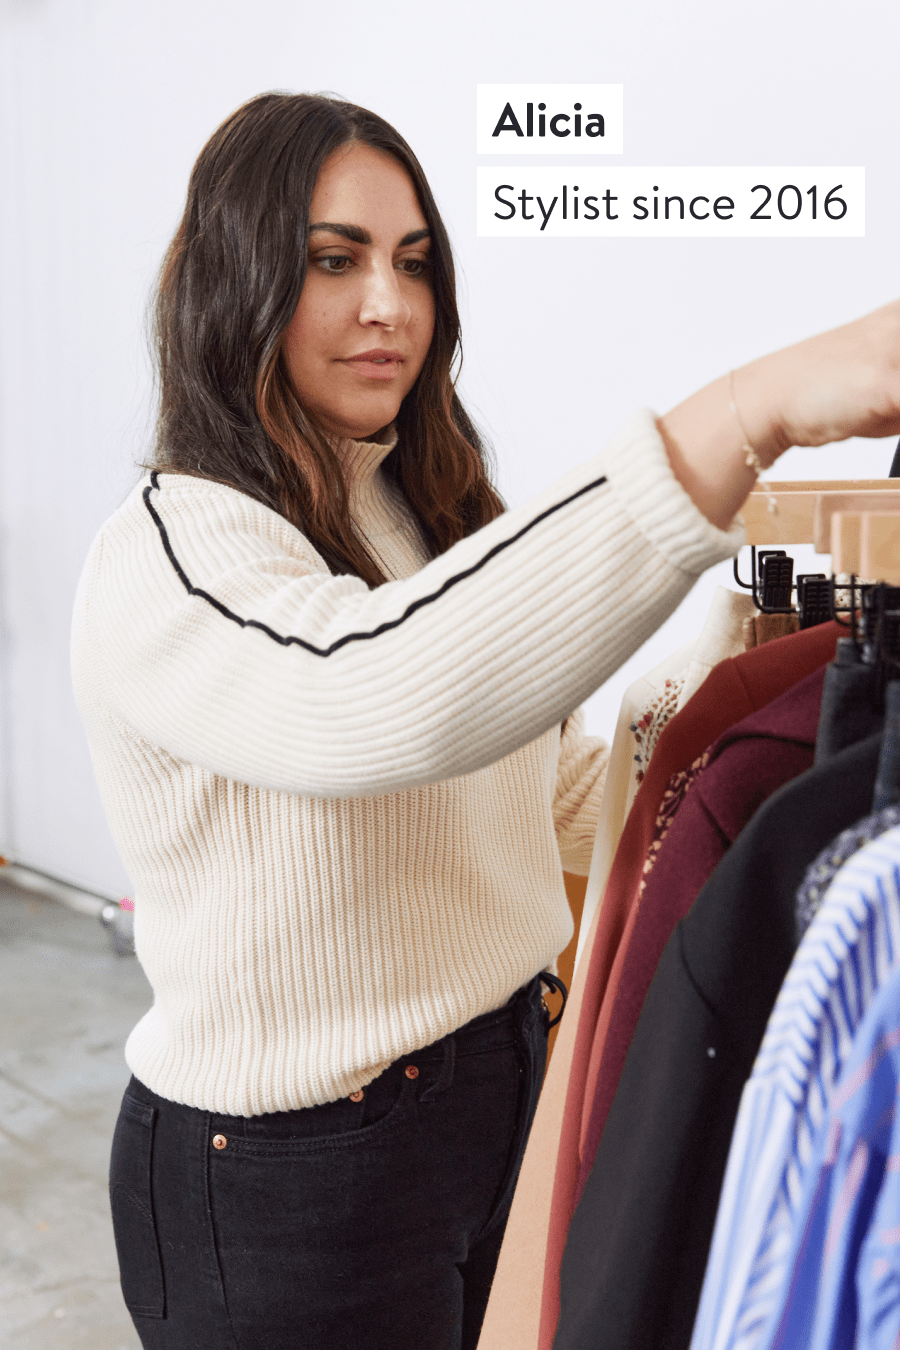 Alicia, Stylist since 2016. Stitch Fix Stylist selecting items from a clothing rack including sweaters, button-down shirts and blouses.